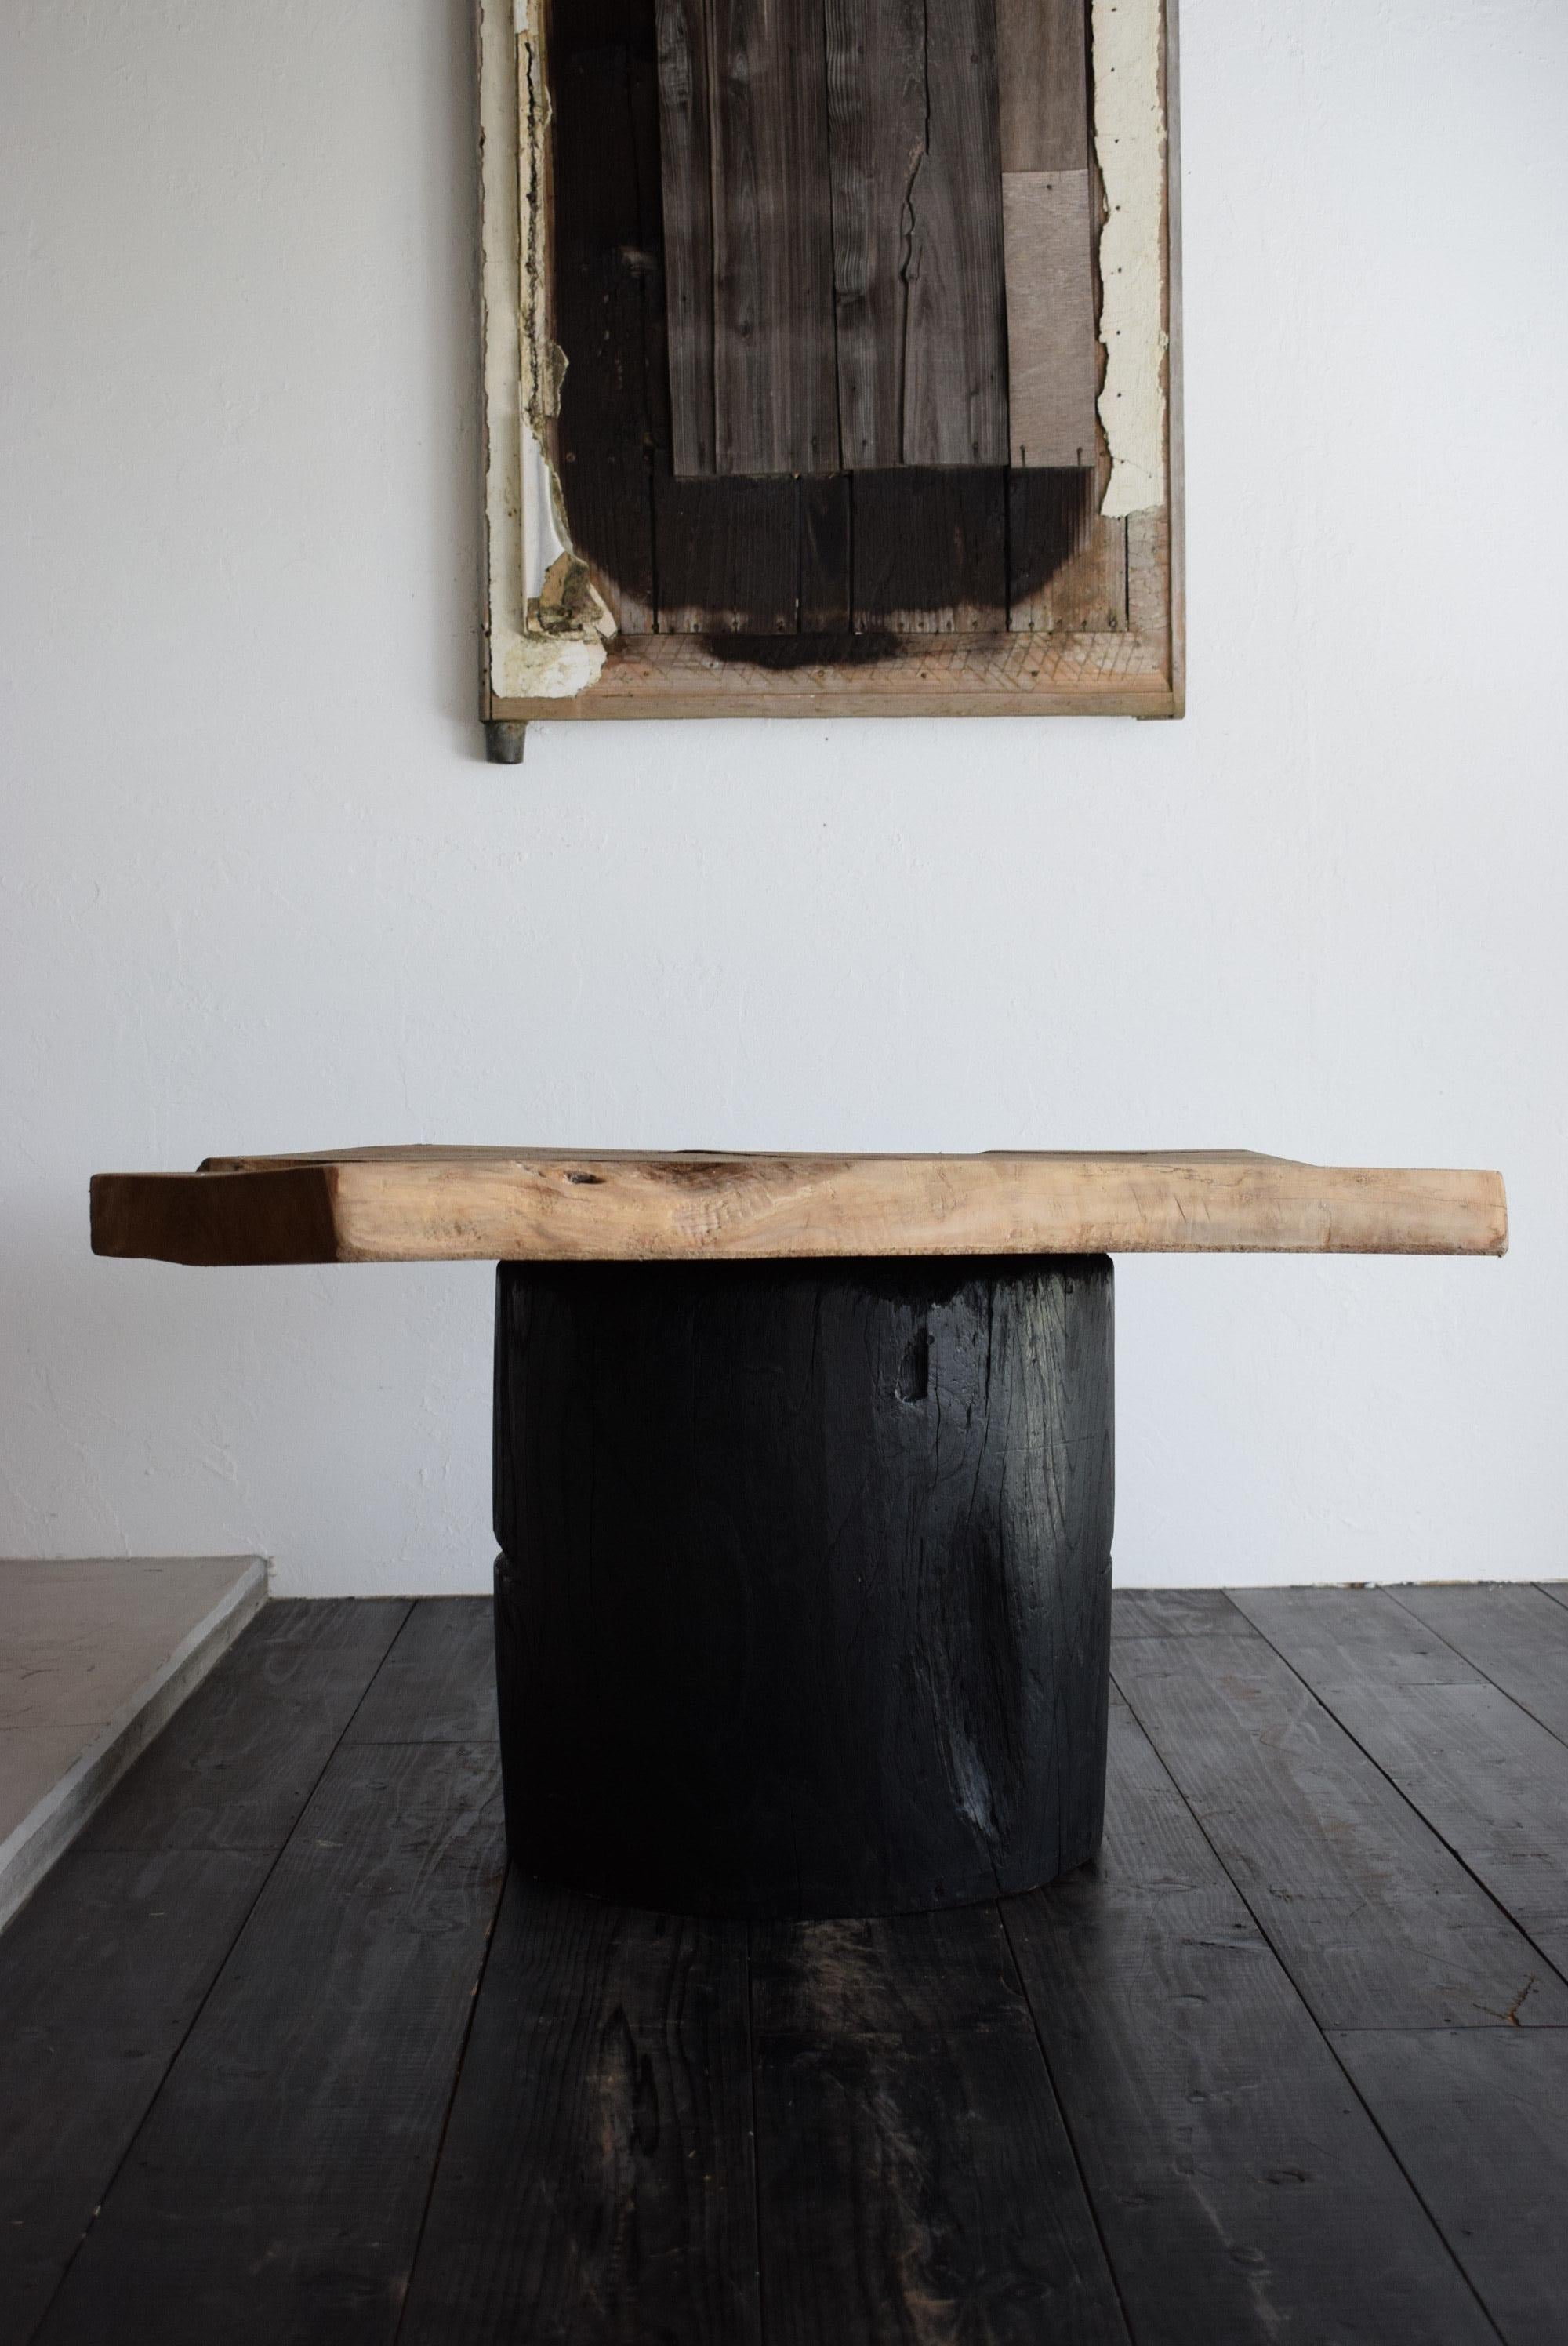 This table uses an old Japanese mortar (a container in which grains and rice cakes are pounded with a pestle and placed inside the mortar) as a base and a natural wood top.

It is a heavy and sturdy table that has a Japanese feel and gives you a